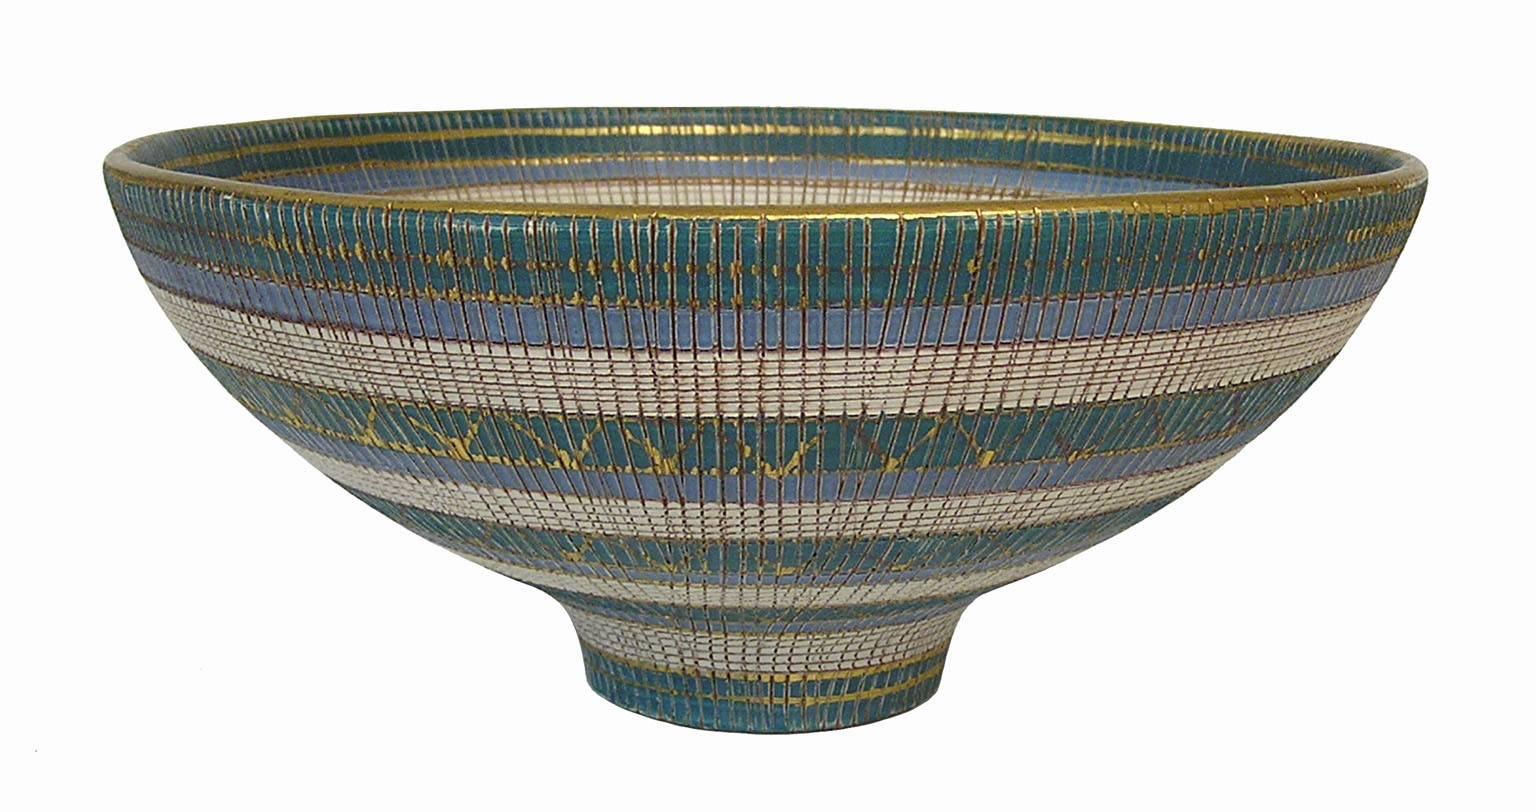 A gorgeous footed Sgraffito ceramic bowl from the 1960s by Bitossi of Italy. Produced as part of the 'Seta' series and decorated in a blue, white and turquoise glaze with gold accents. Signed on the bottom and in overall excellent condition.